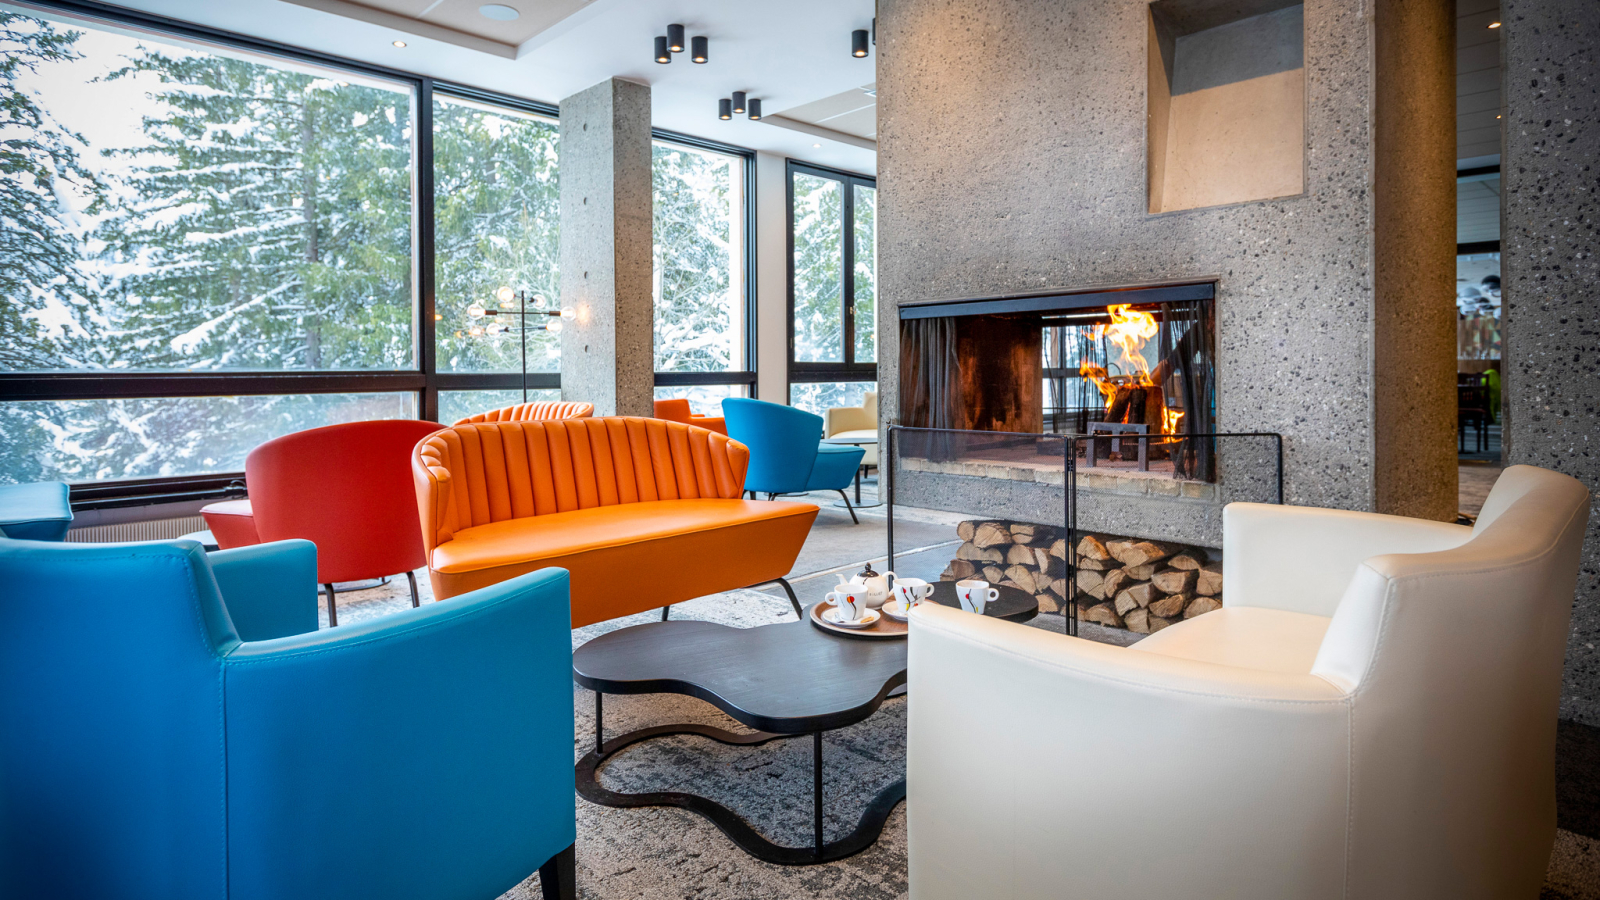 The Bauhaus-style fireplace at MMV Le Flaine, located on the first floor in the communal hall not far from the restaurant area